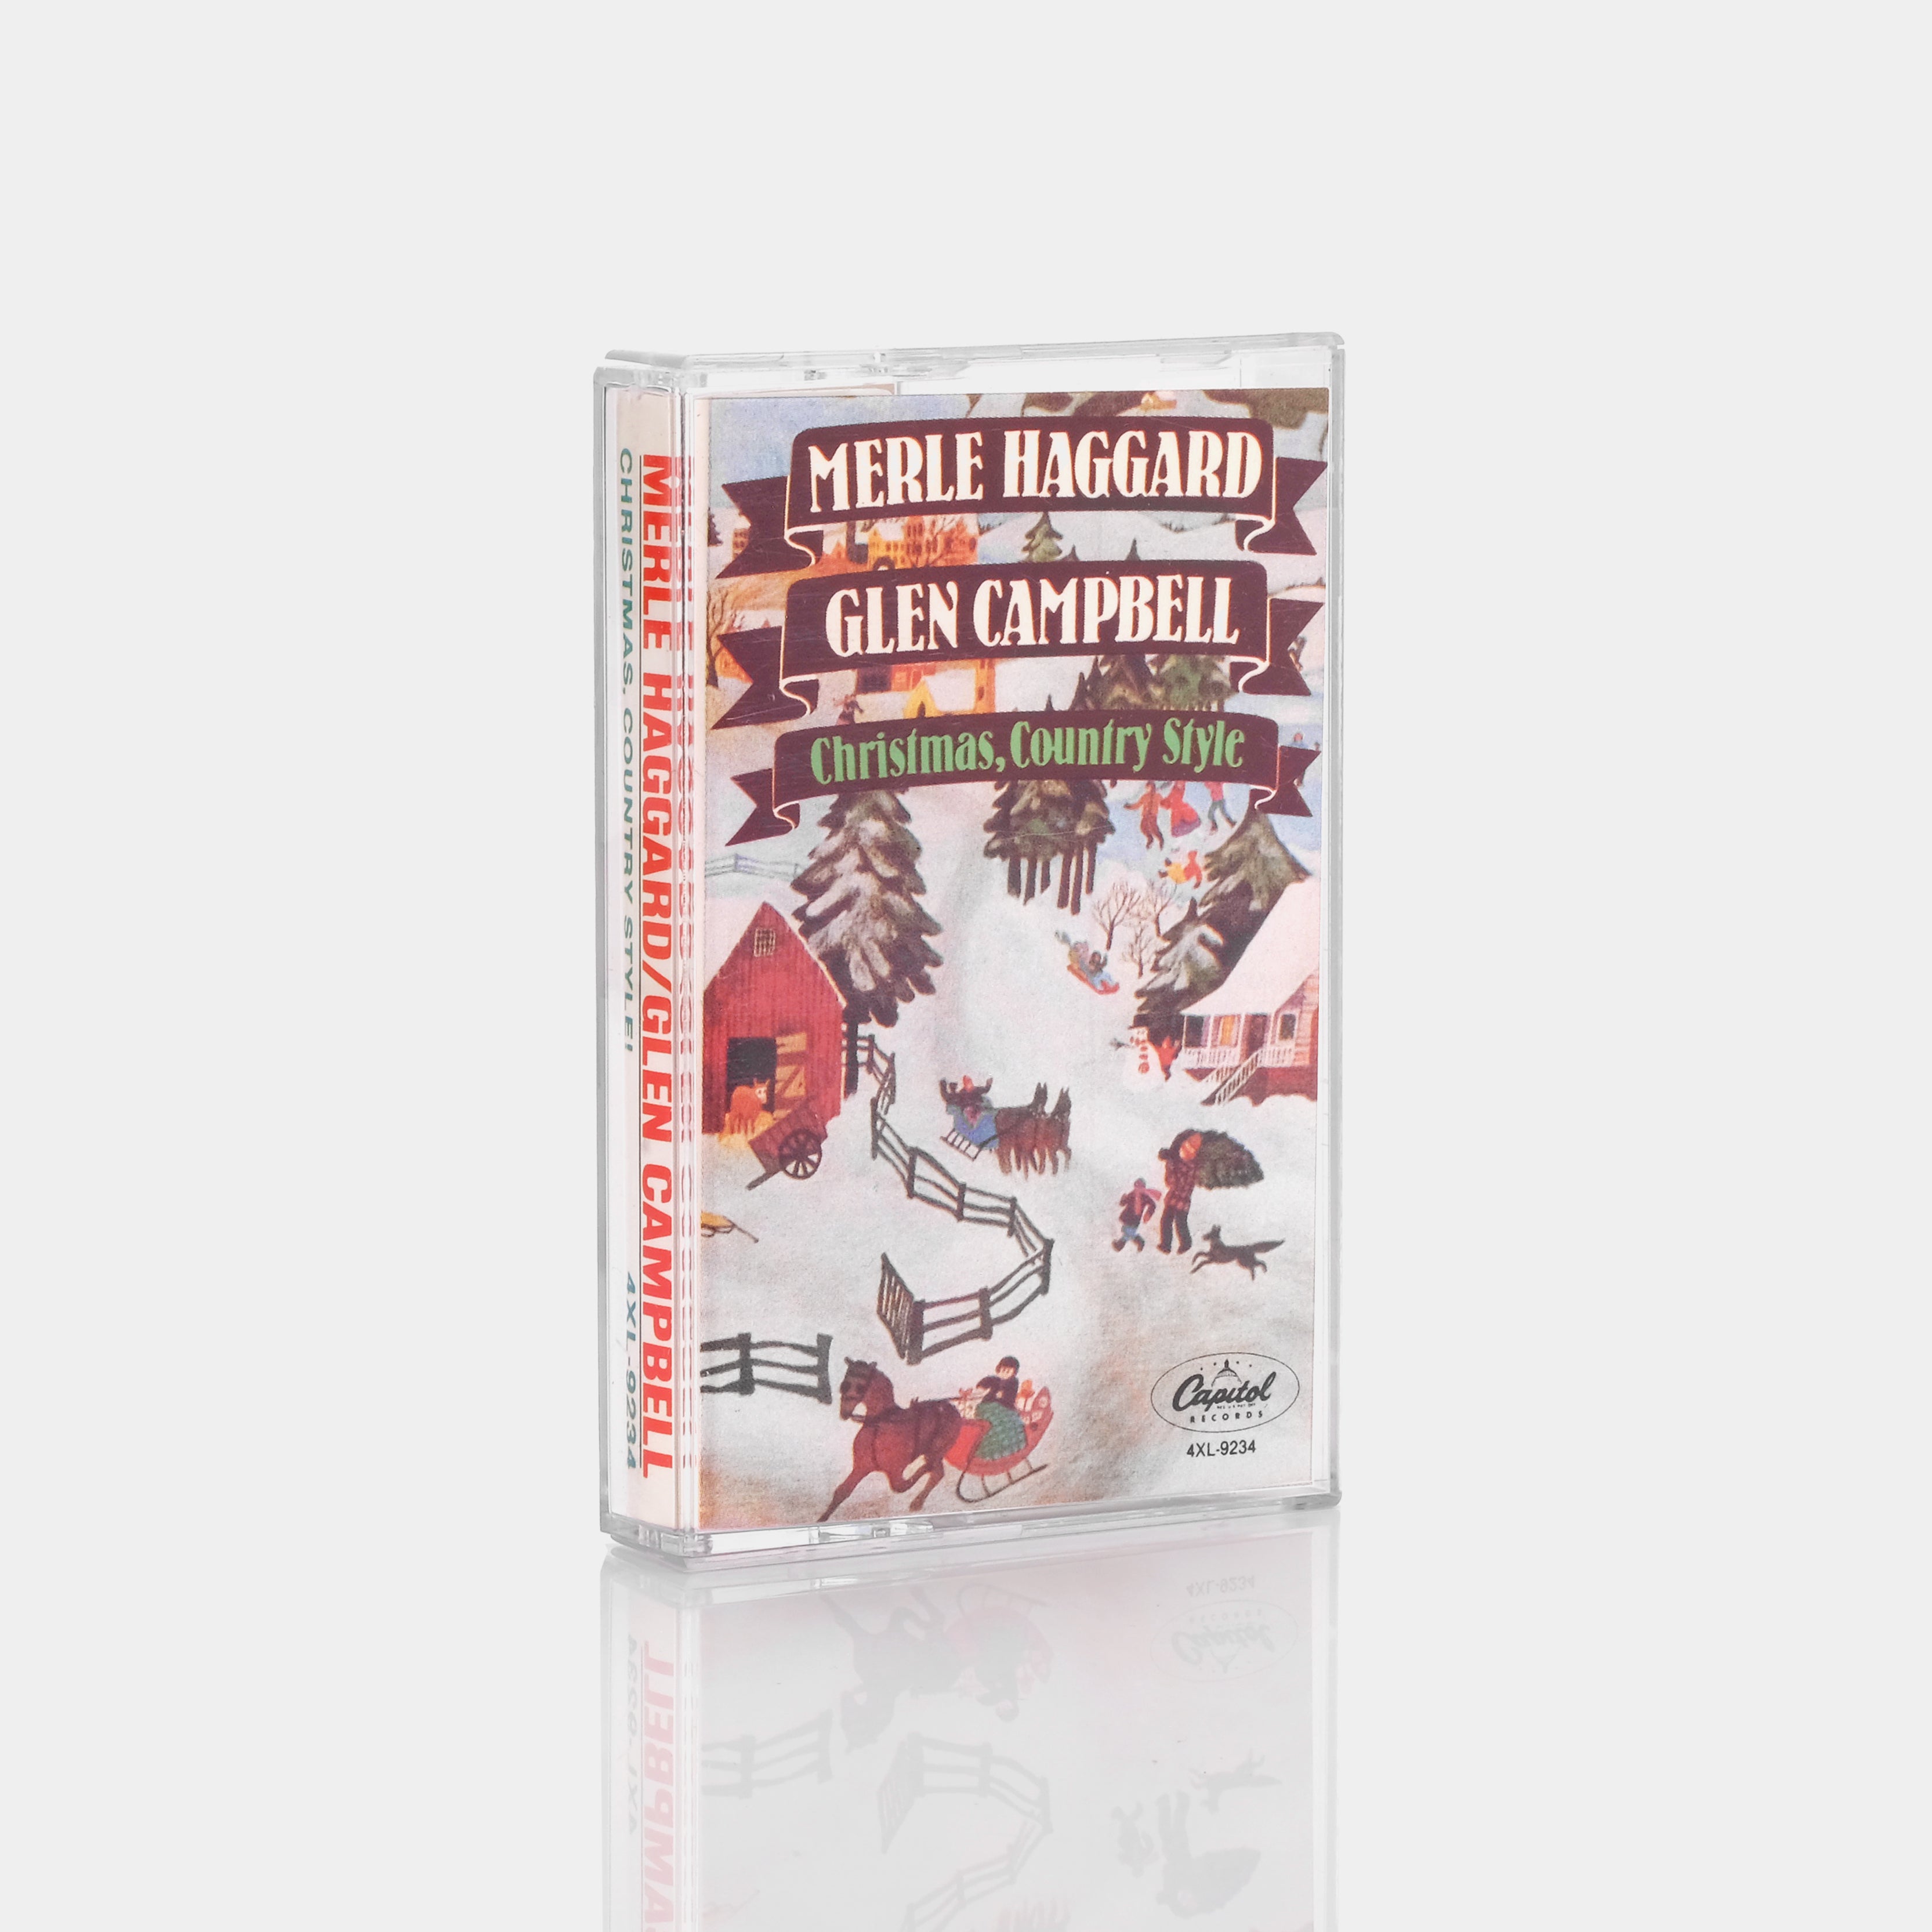 Merle Haggard, Glen Campbell - Christmas Country Style Cassette Tape